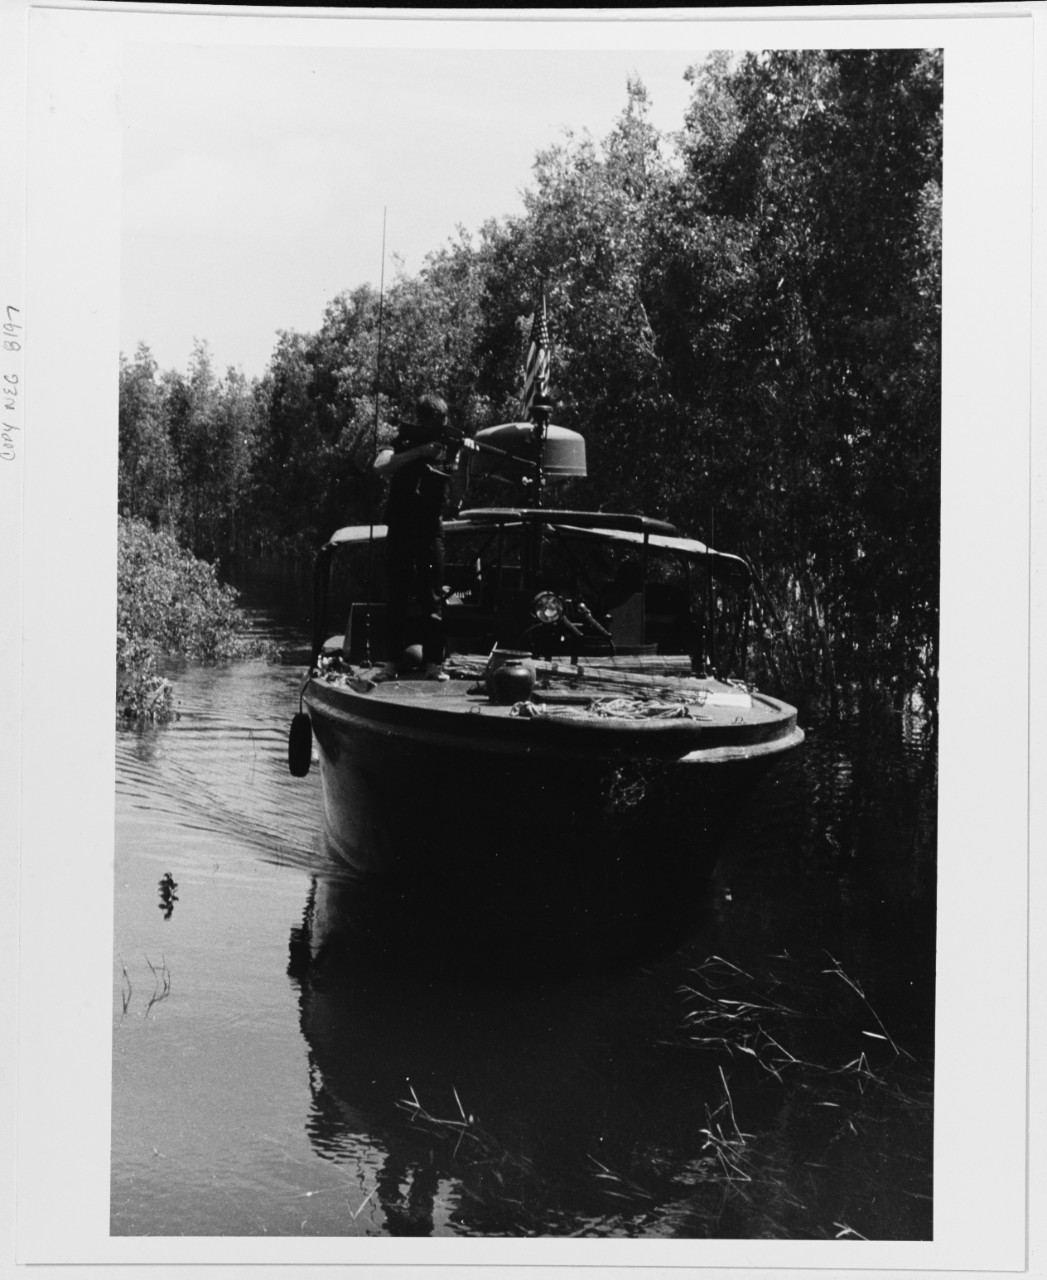 A PBR (river patrol boat) cruises on a canal in search of Viet Cong.